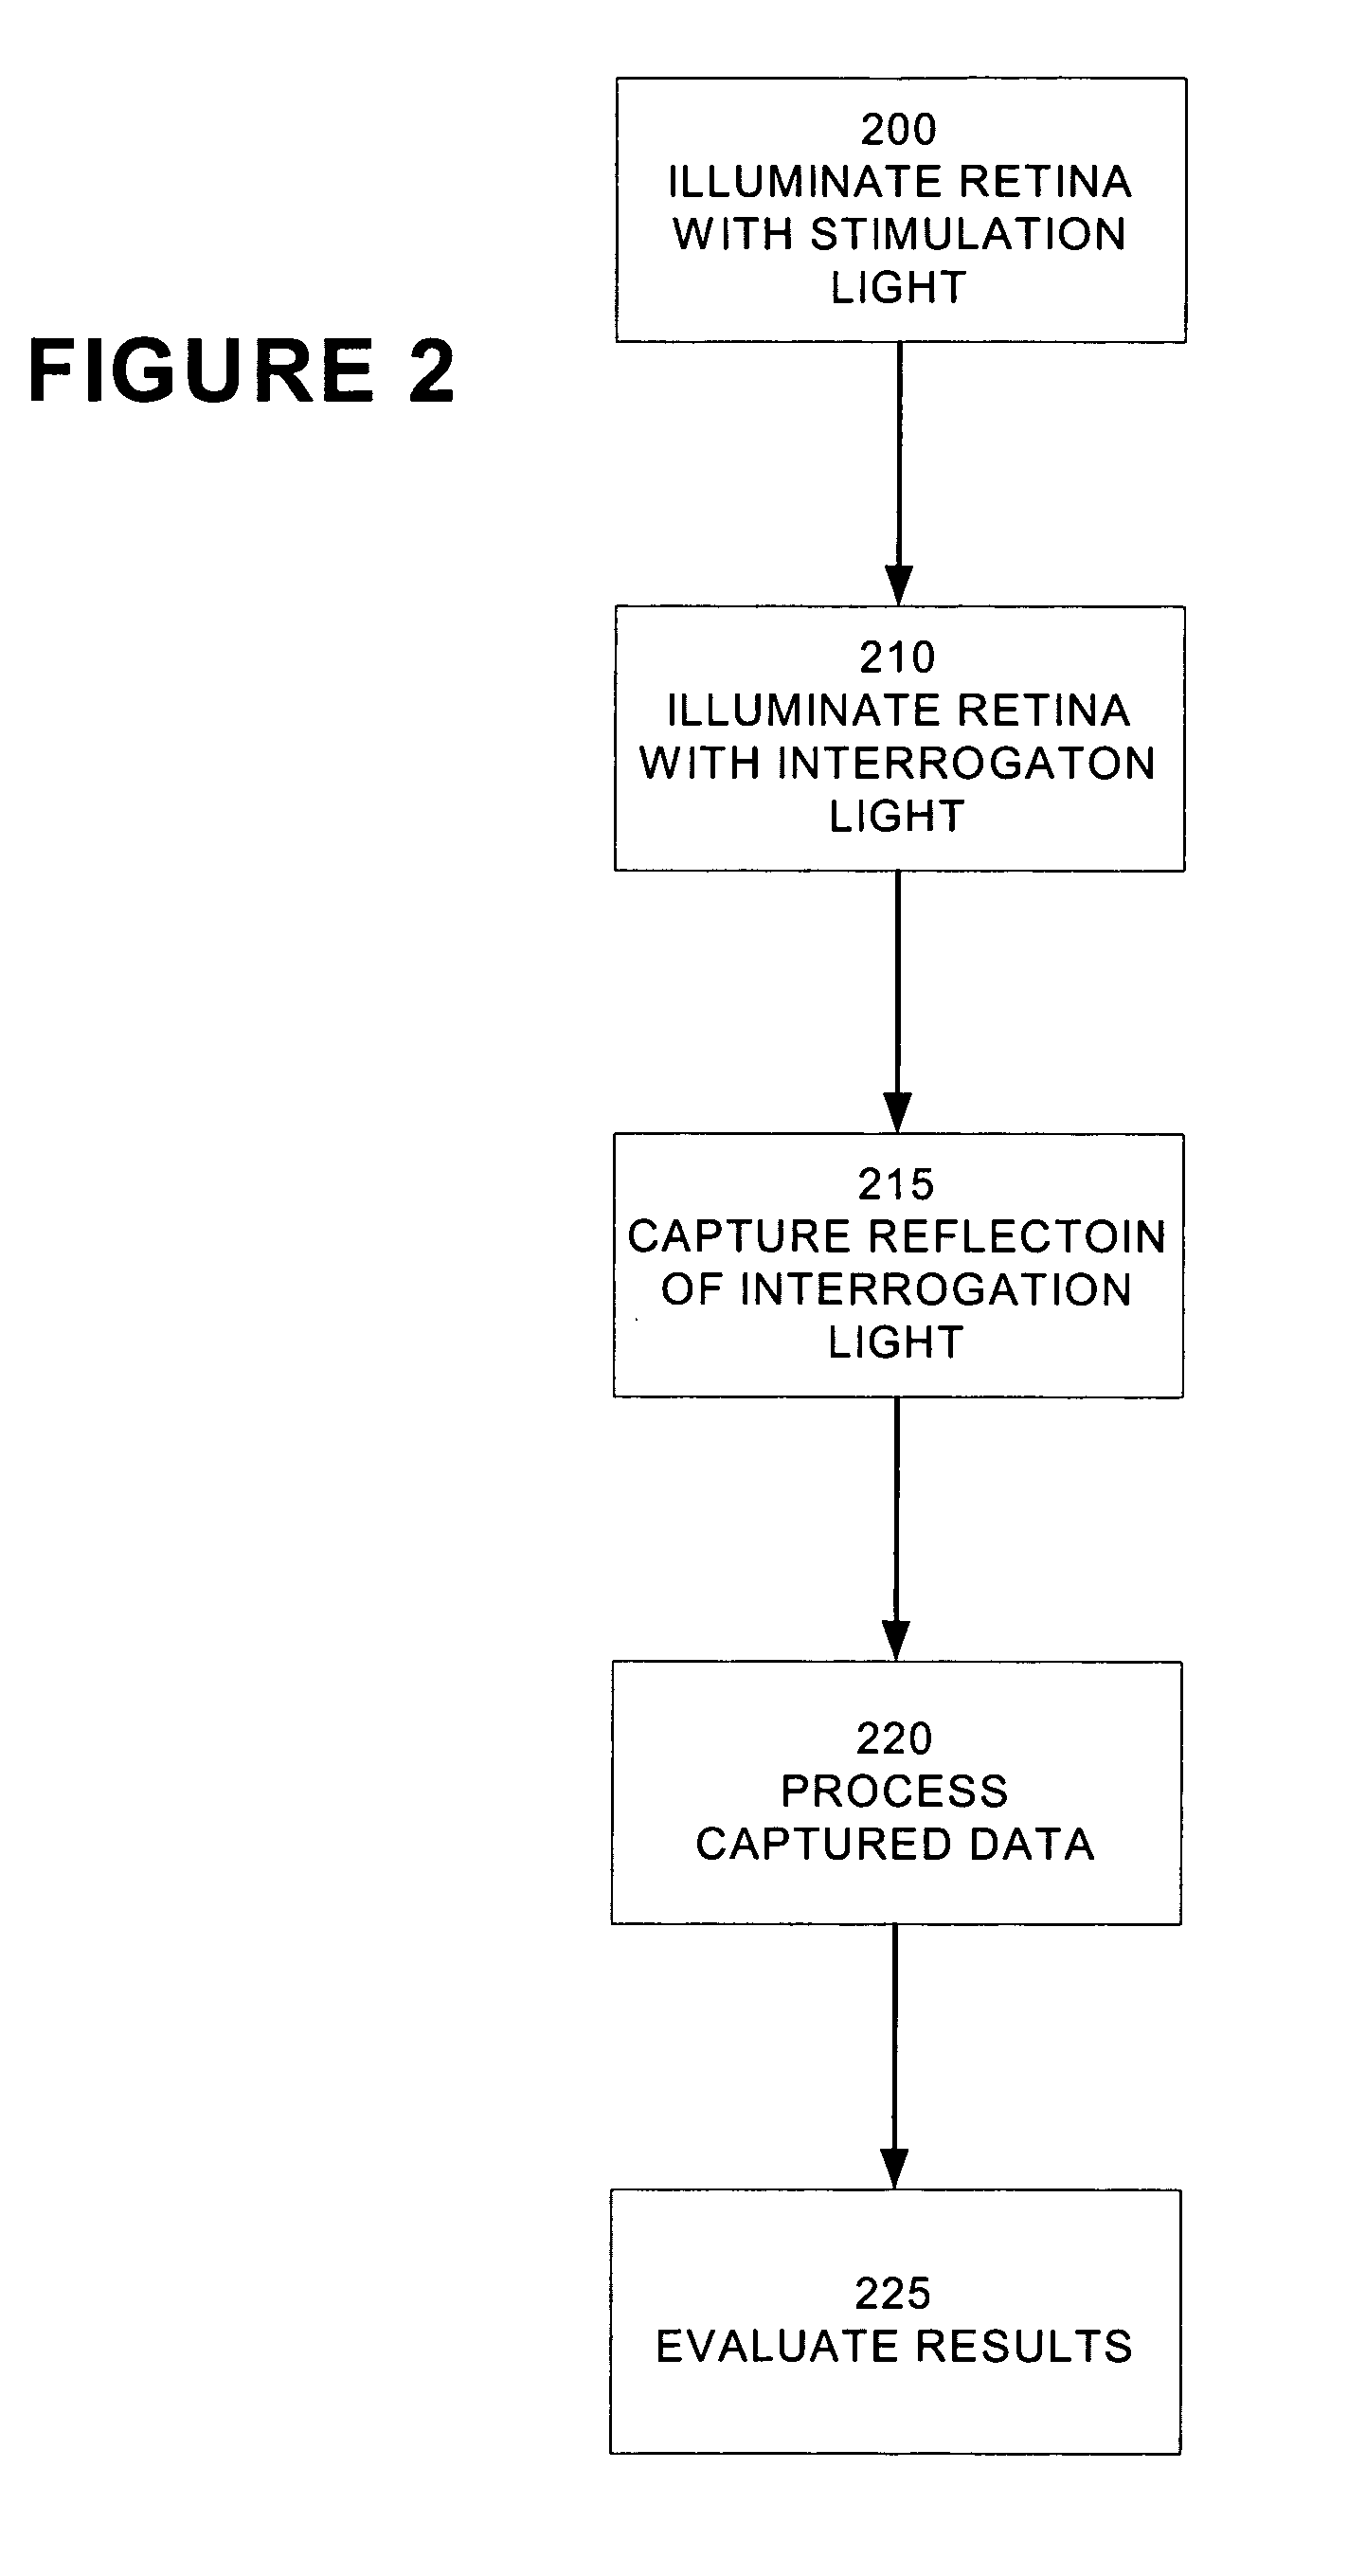 Method for detecting a functional signal in retinal images